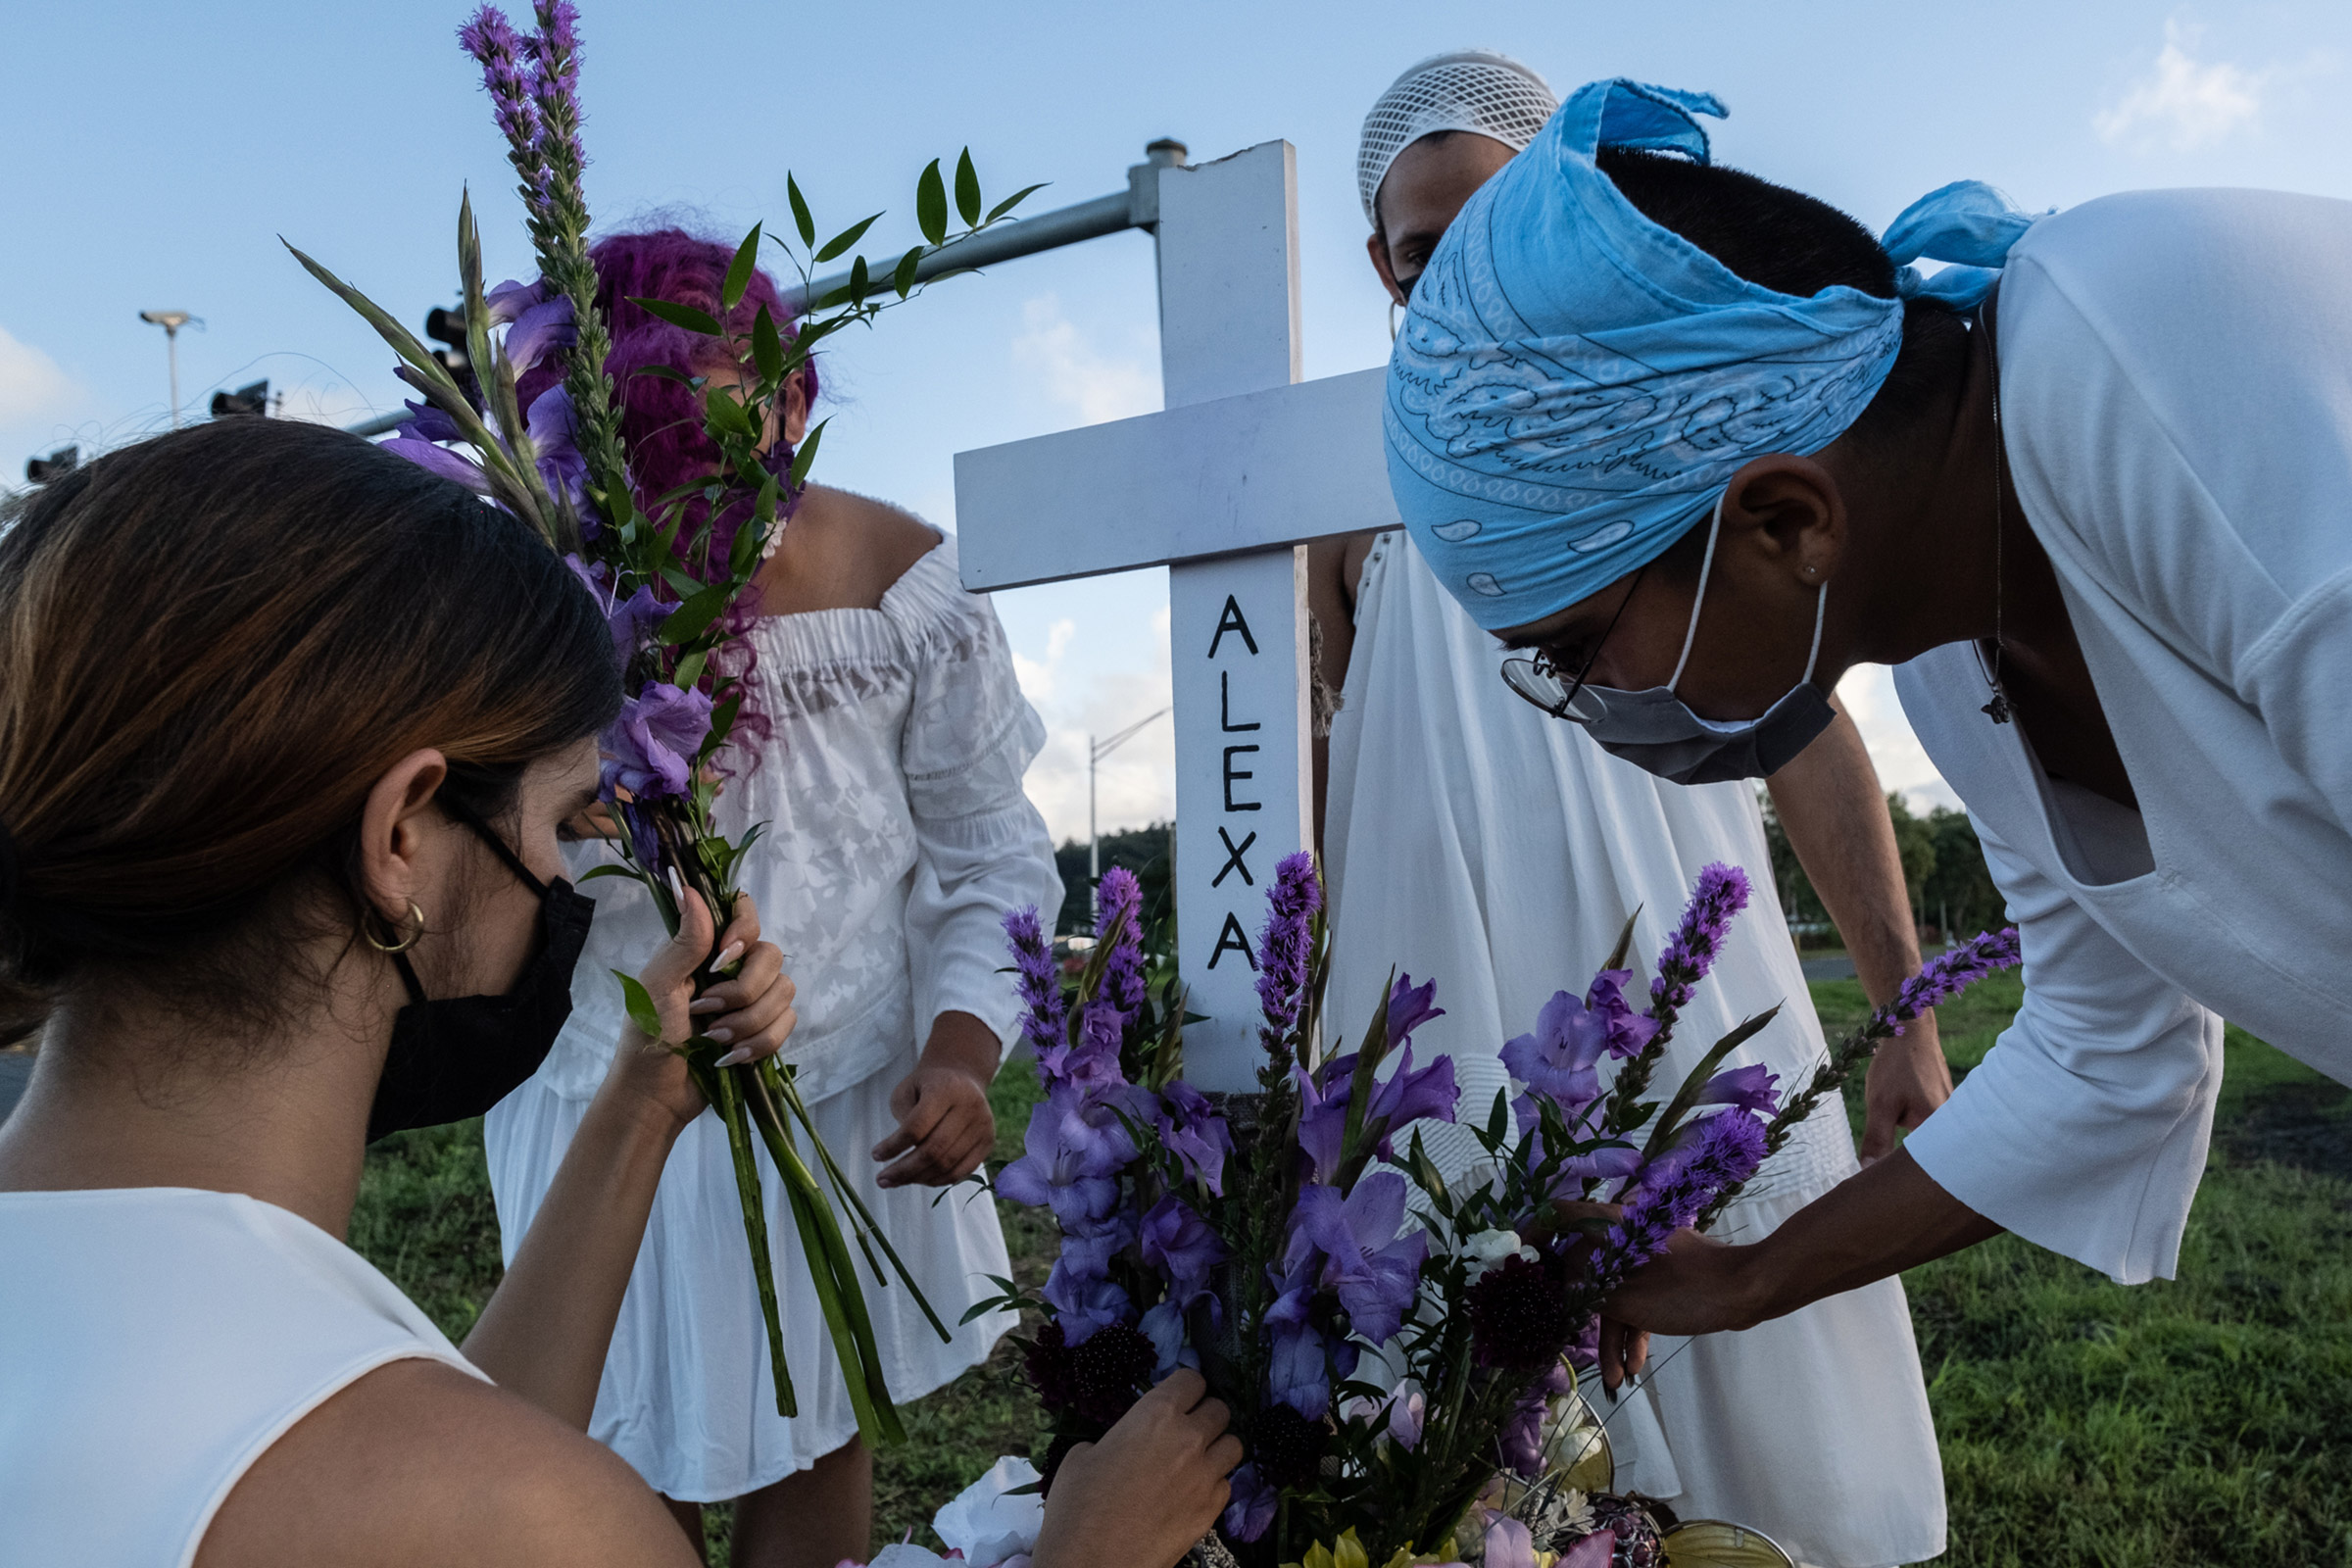 Members of House of Grace pay respects to Alexa Negrón Luciano, a transgender woman who was murdered in February 2020, on the site of a makeshift grave dedicated to her in Toa Baja, Puerto Rico. (Gabriella N. Báez—Magnum Foundation)